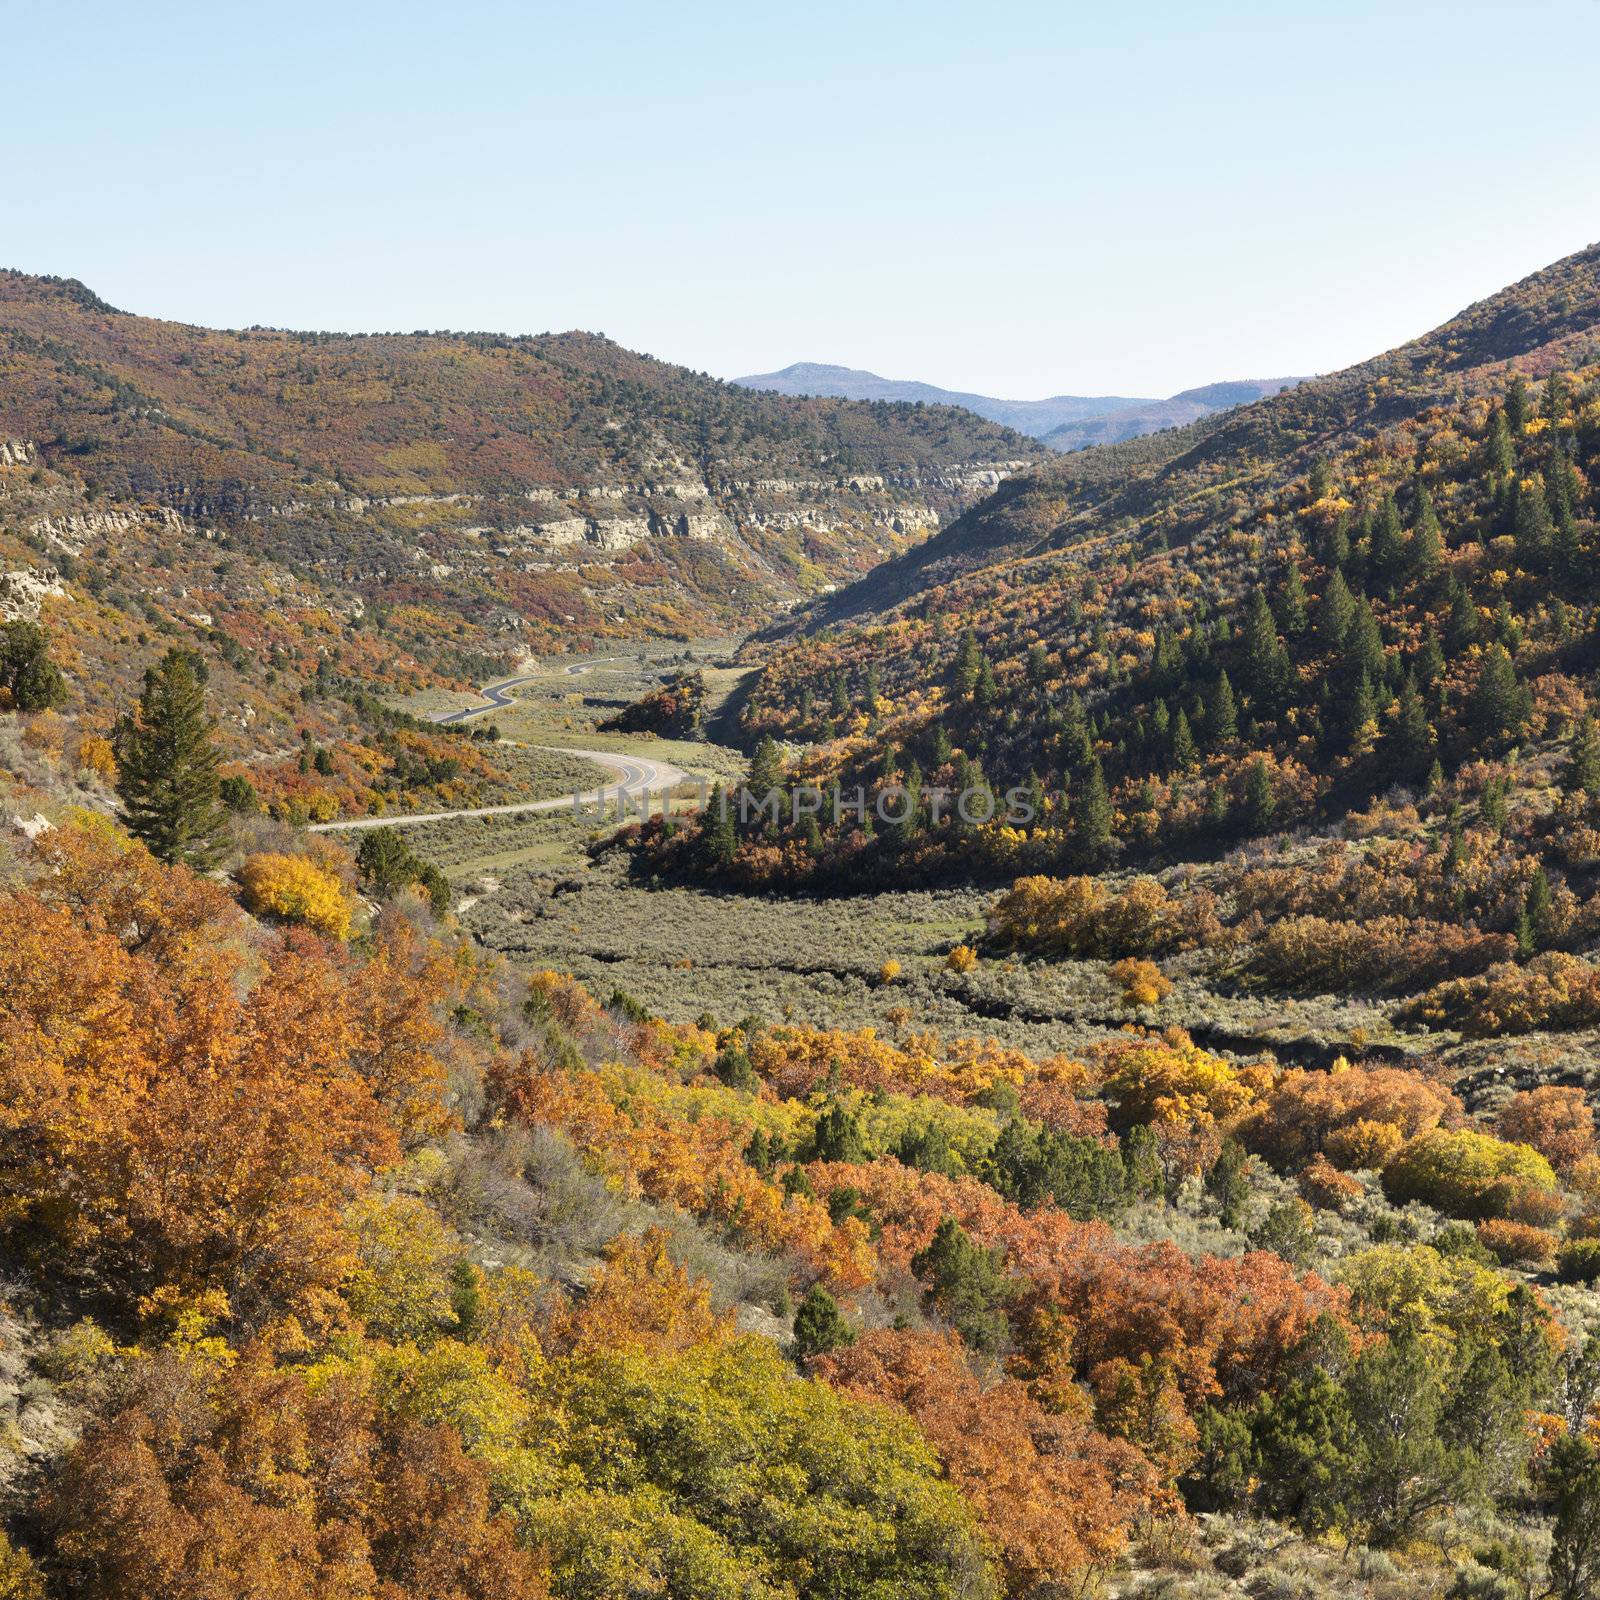 Landscape with trees in Fall color and winding road in Utah.